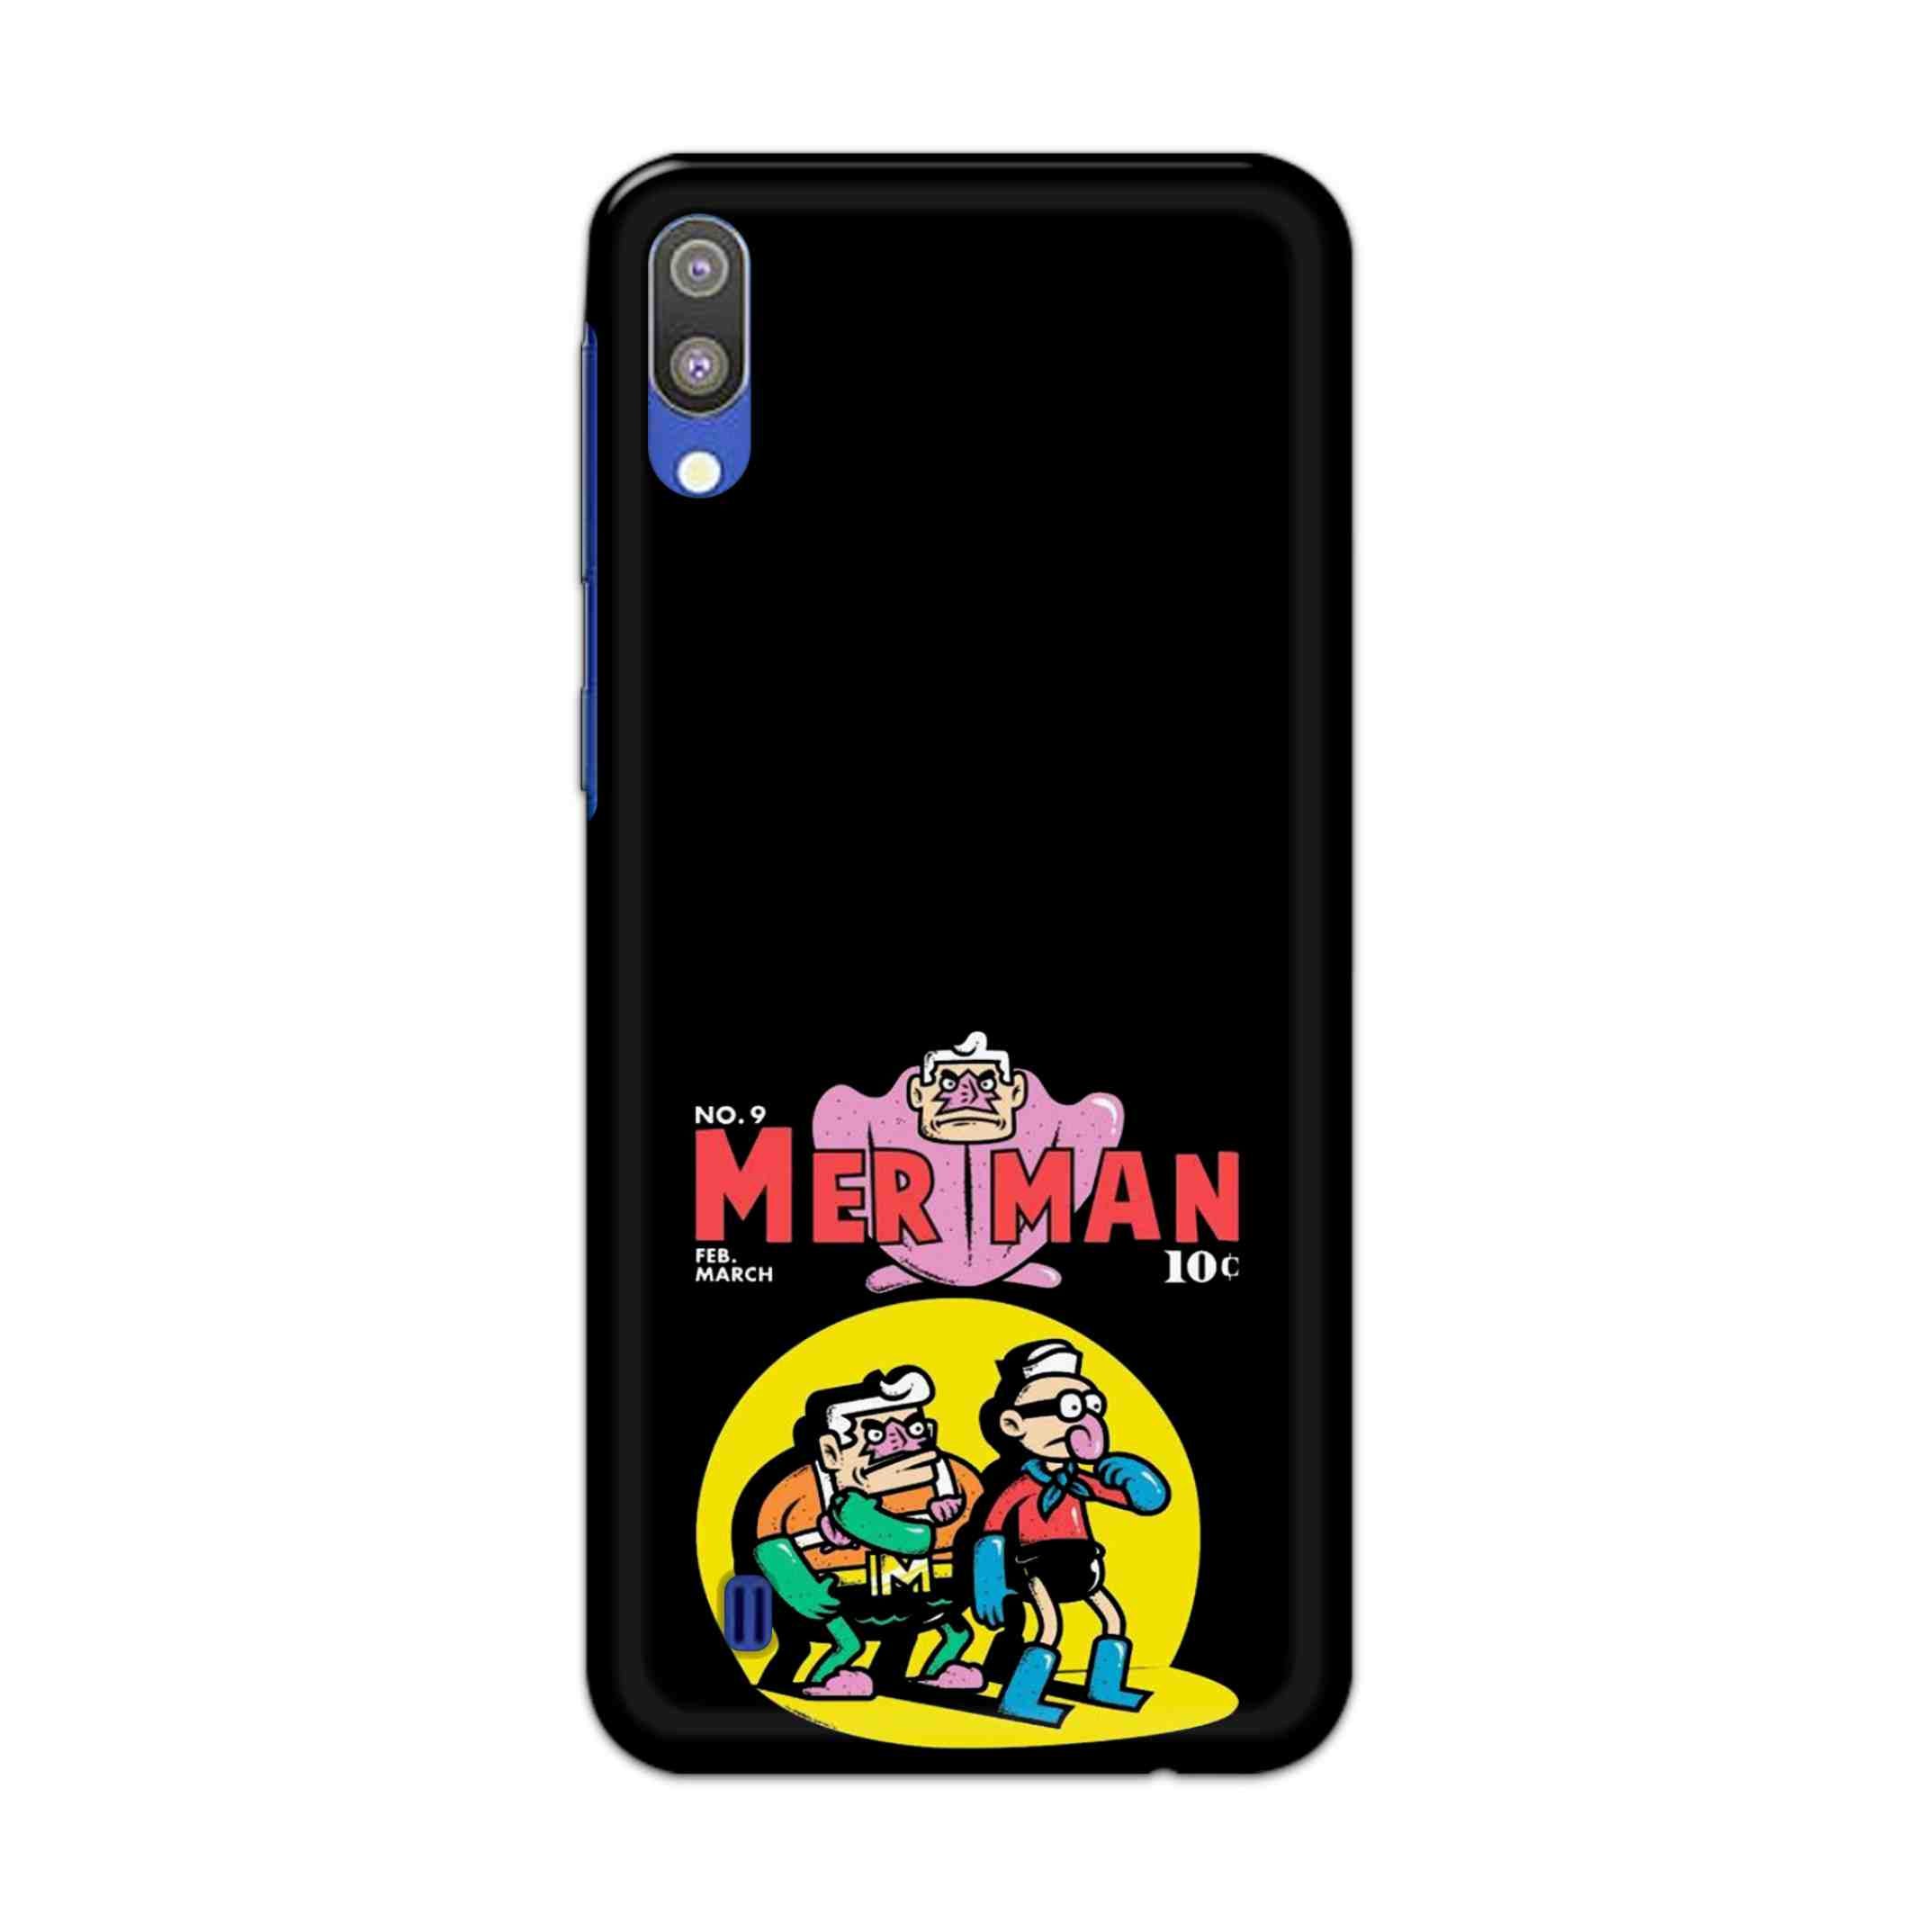 Buy Merman Hard Back Mobile Phone Case Cover For Samsung Galaxy M10 Online